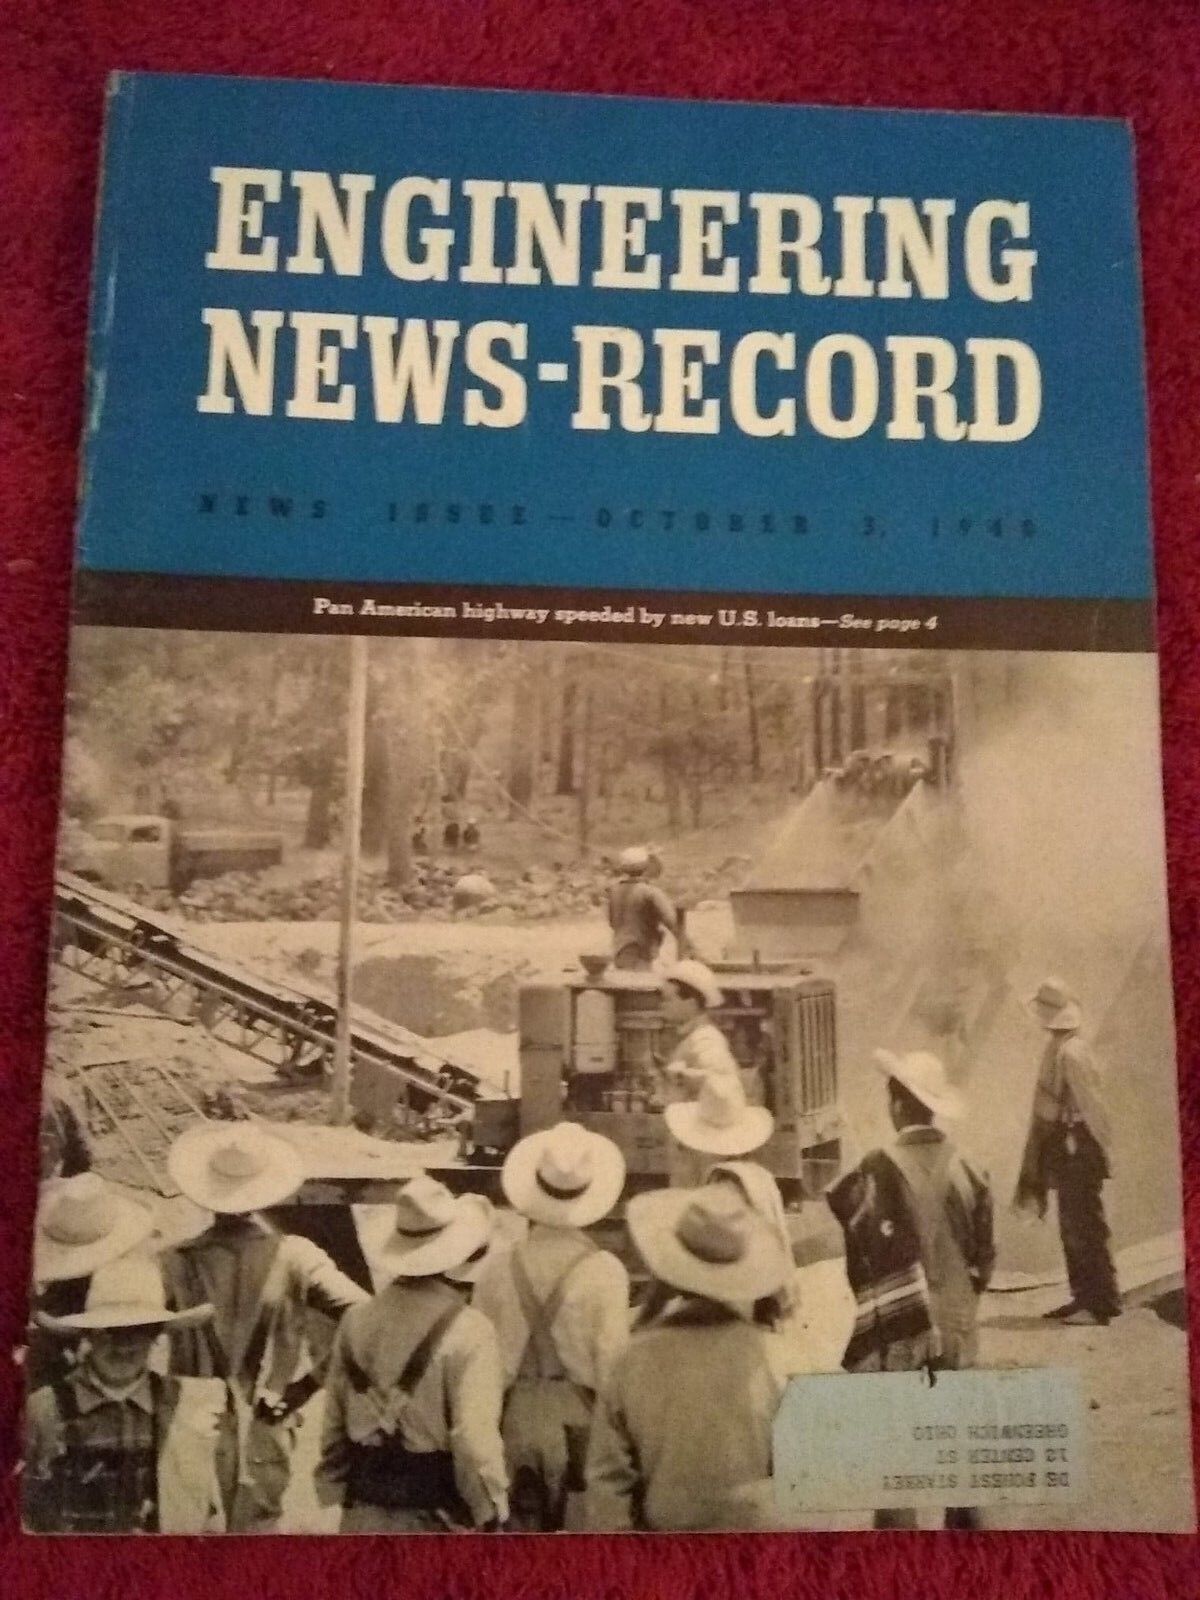 Engineering News-Record Oct 3 ,1940 News Issue: Pan American Highway Construct.